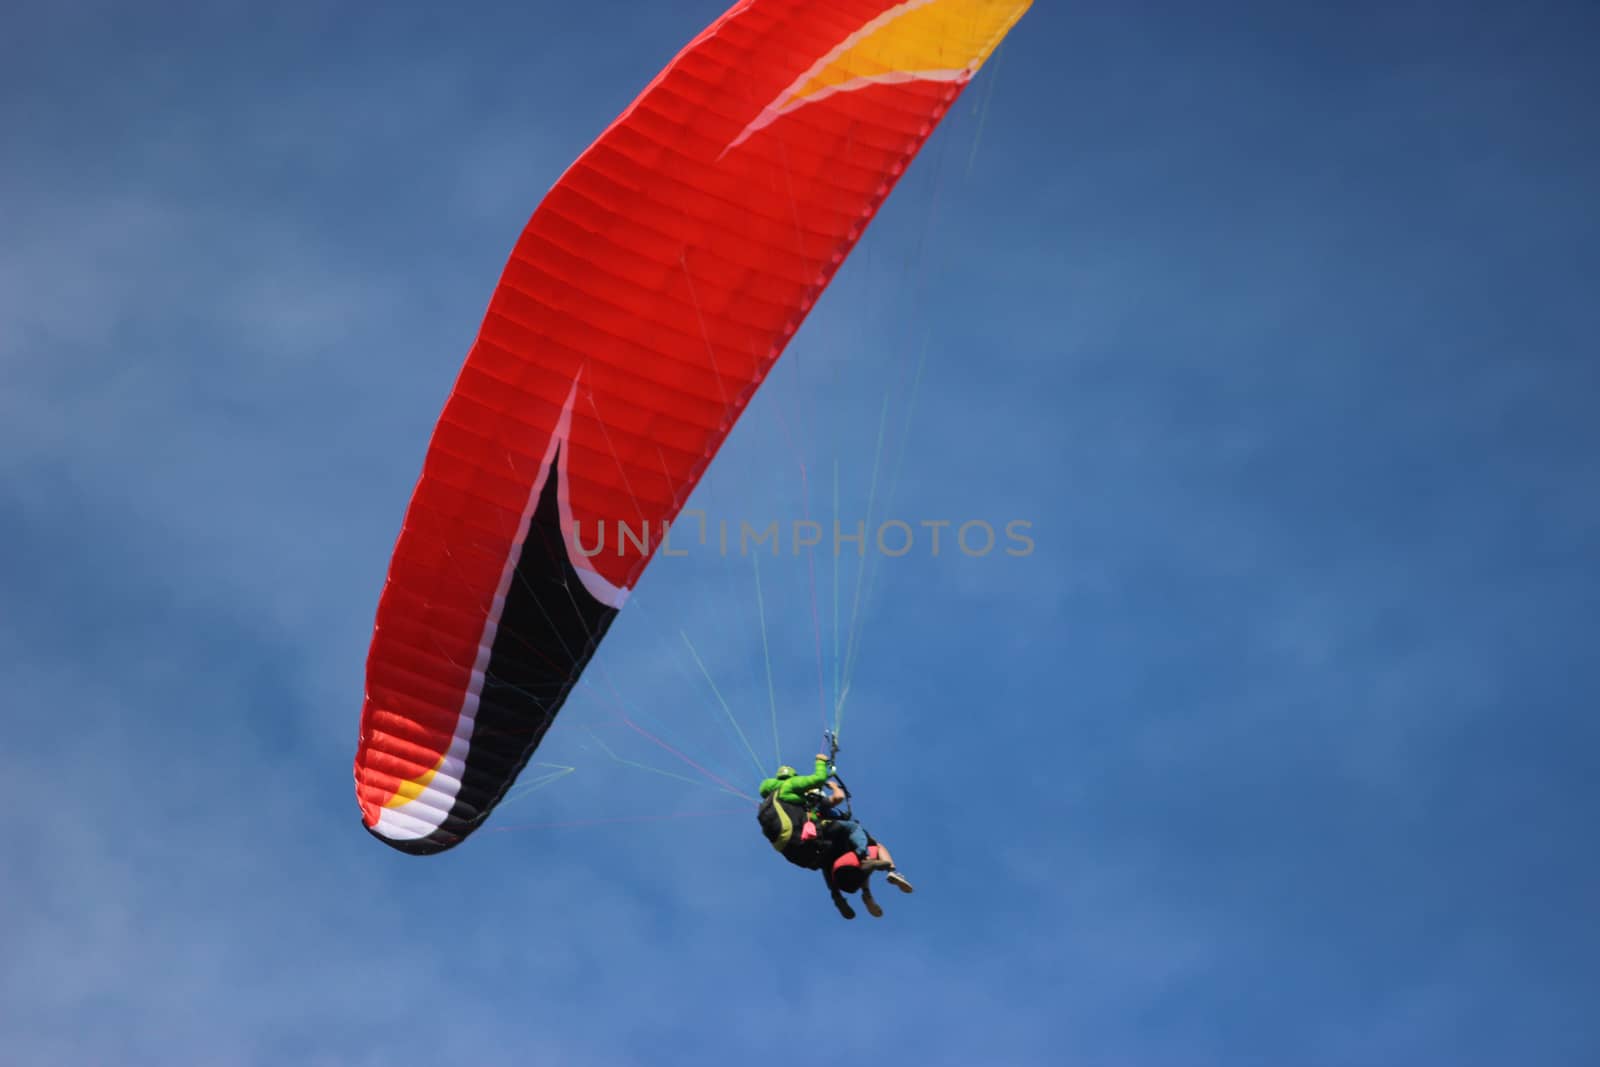 Flying Tandem Paragliding Above the Mediterranean Sea in France